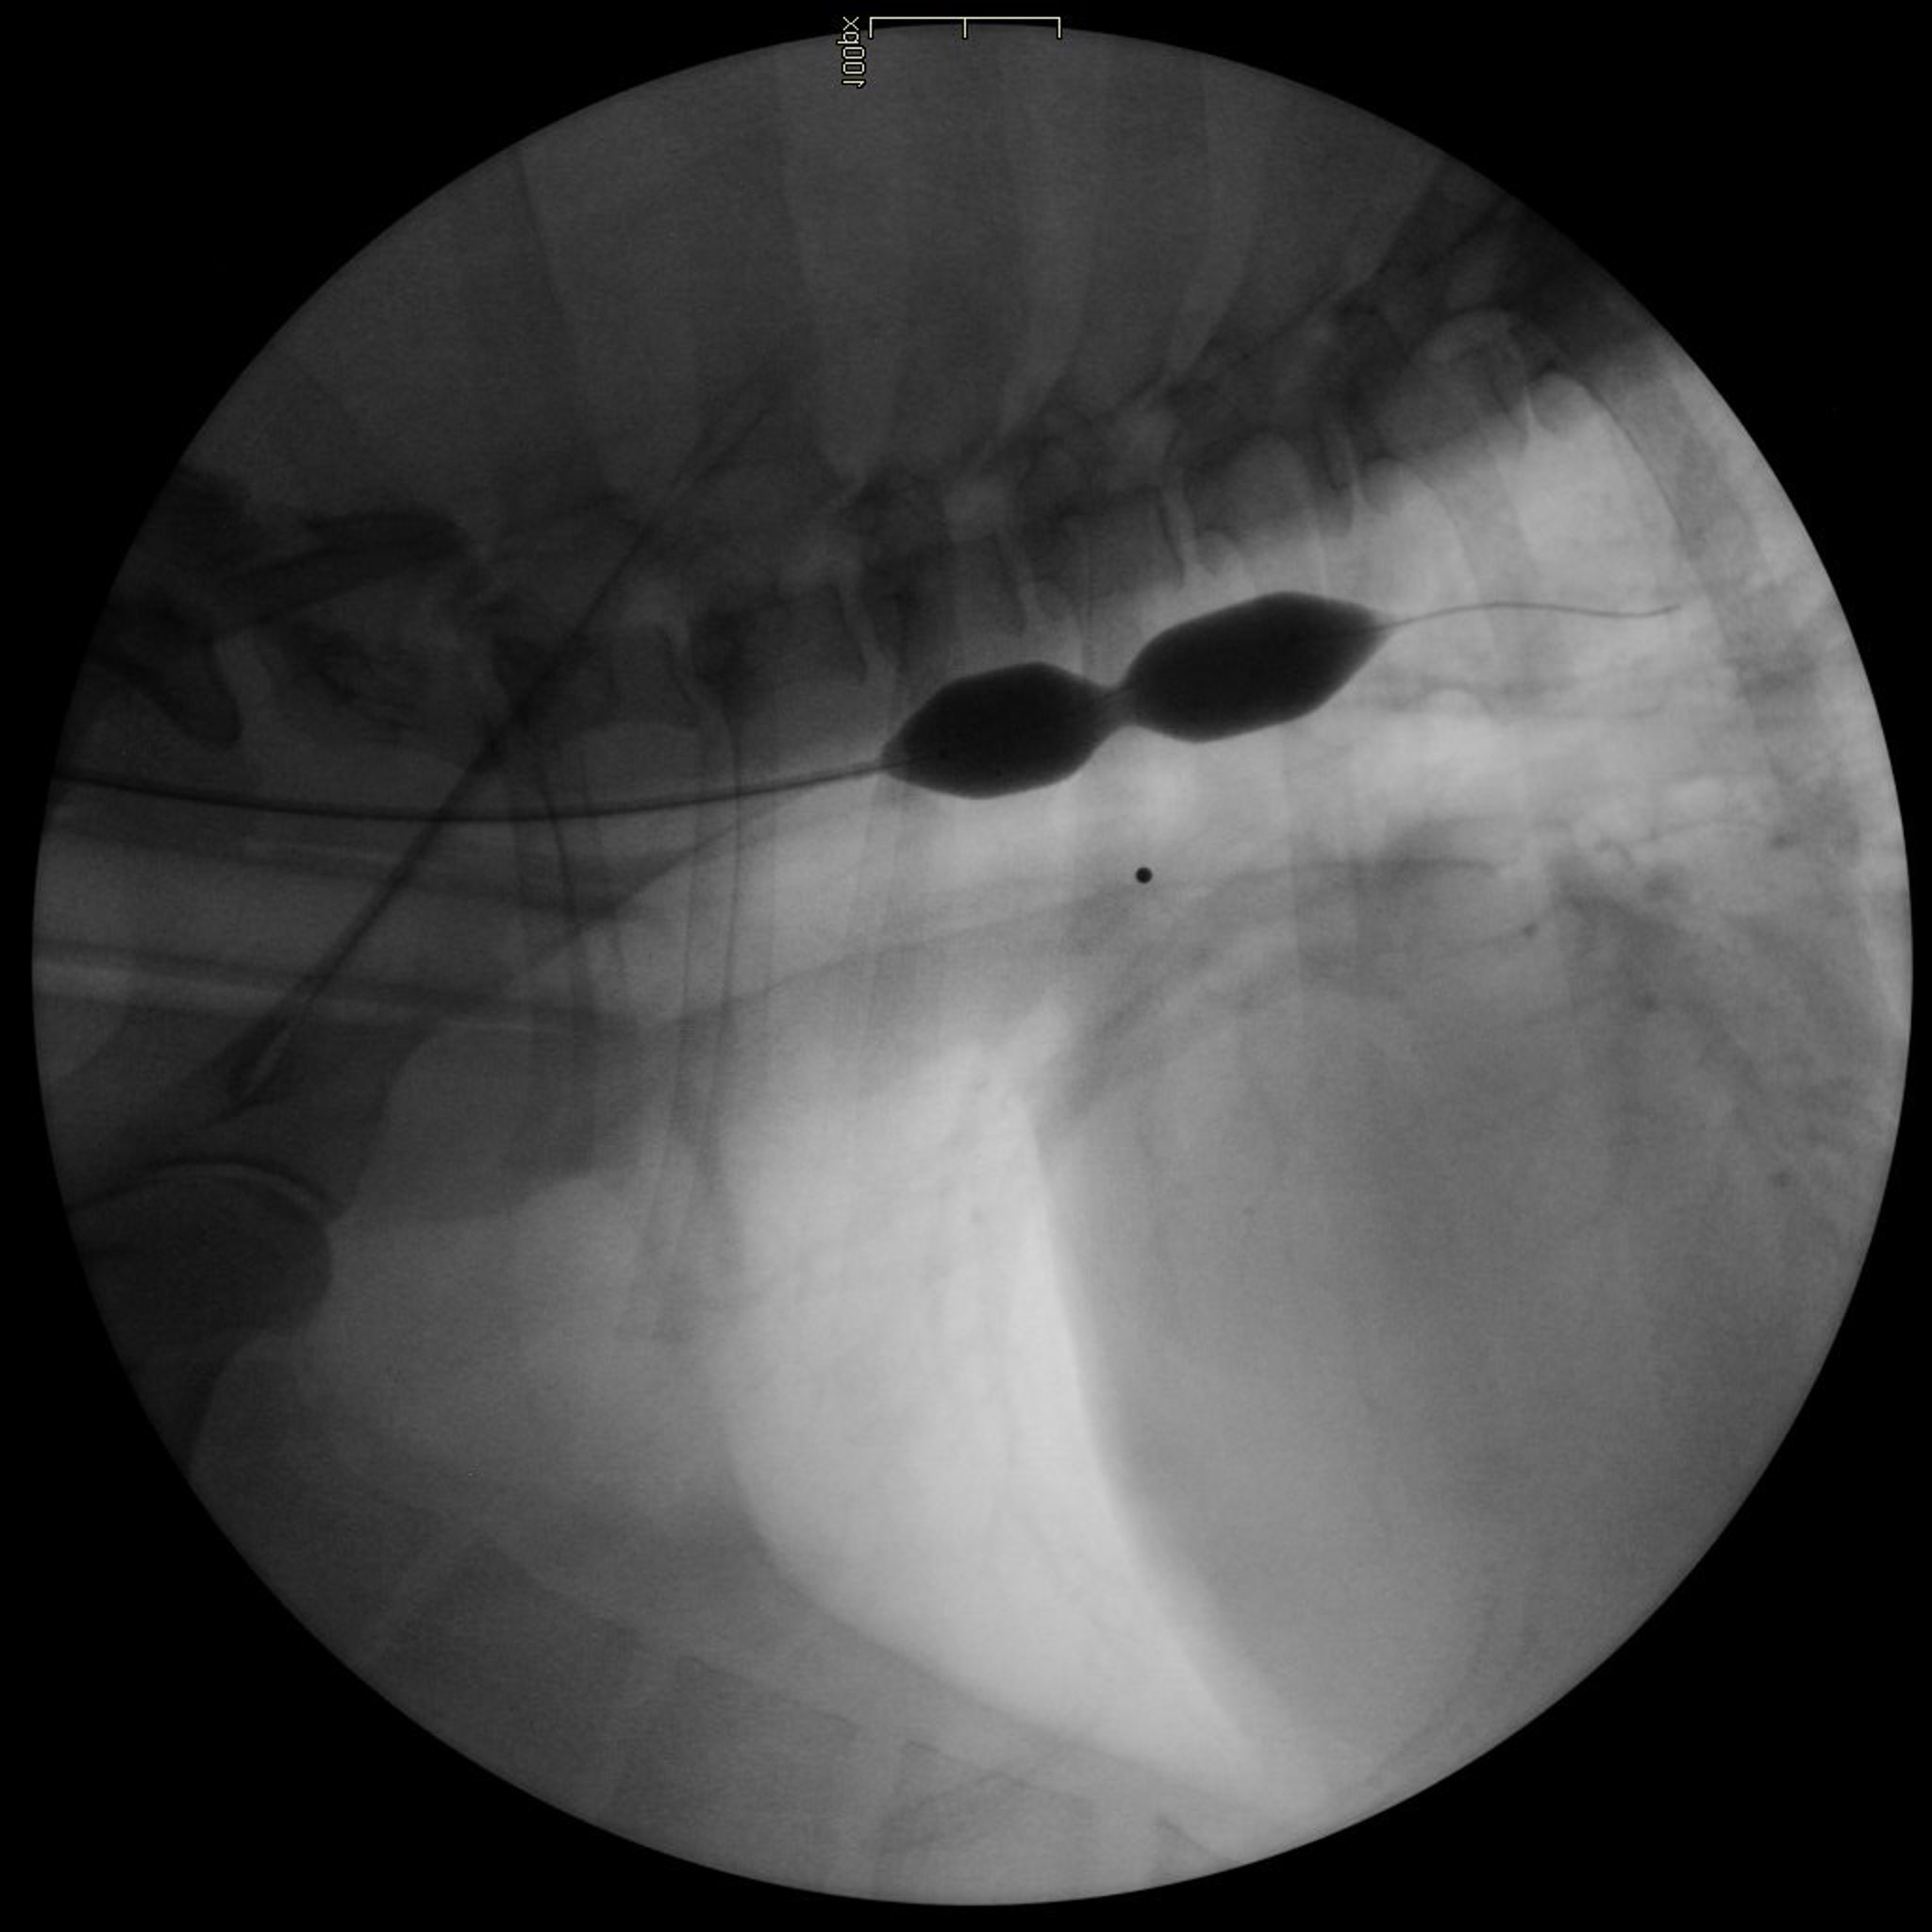 Balloon dilation, esophageal stricture, dog